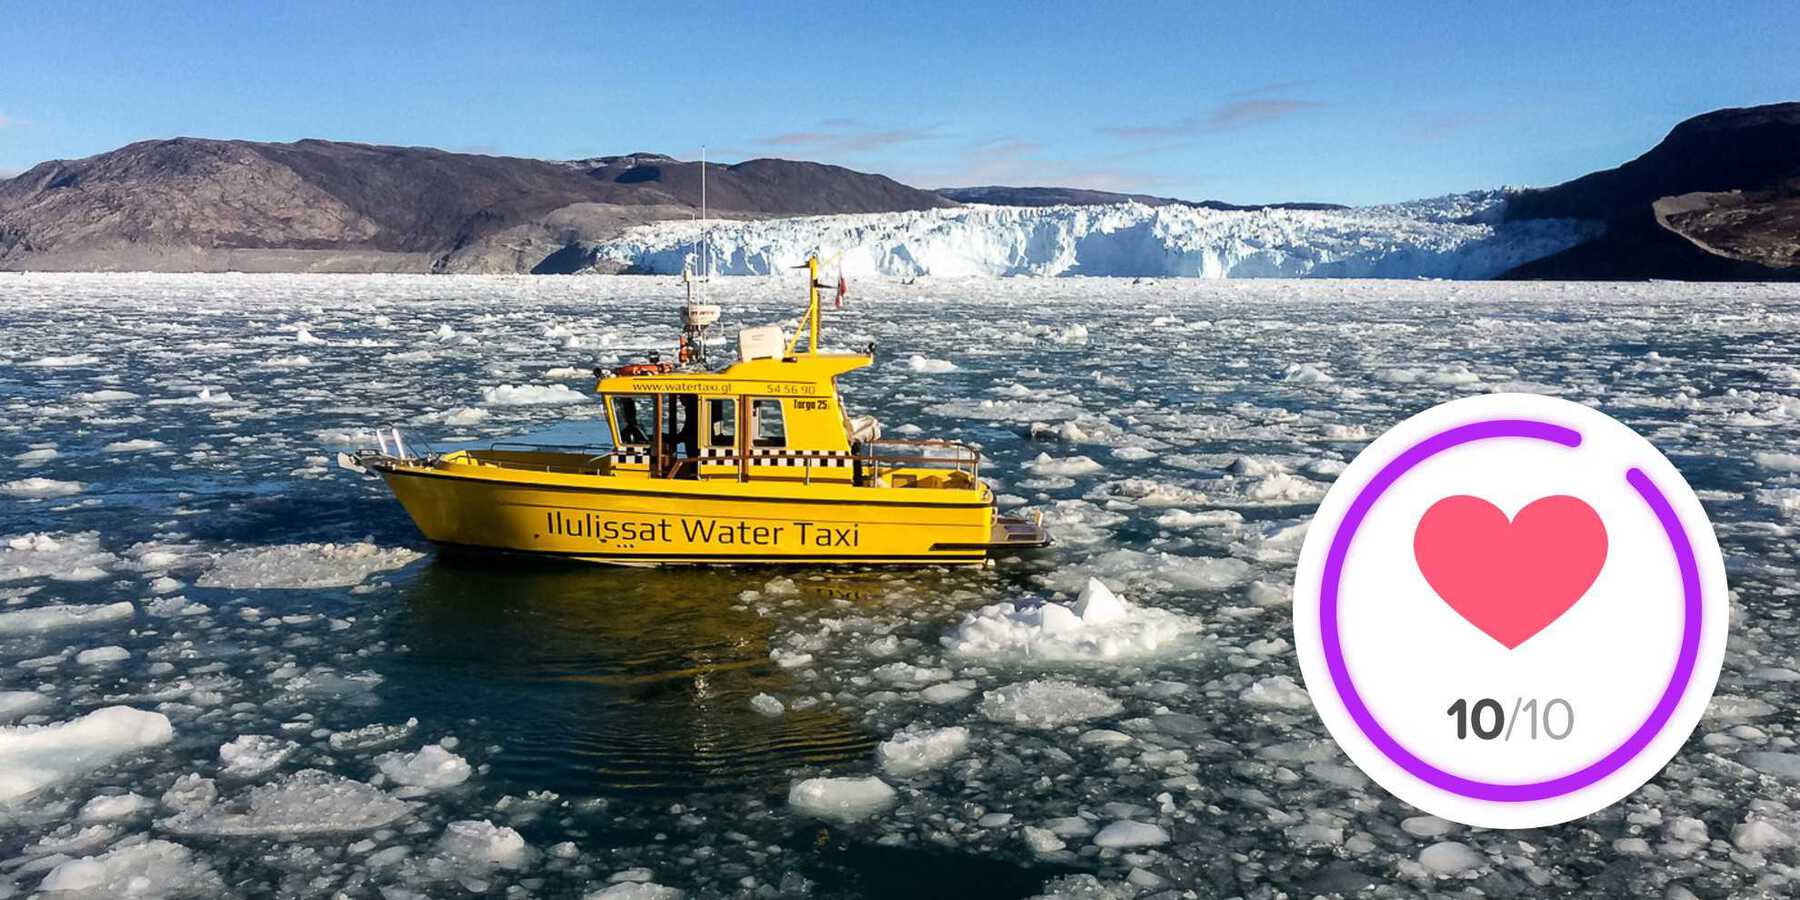 Small yellow boat with text Ilulissat Water Taxi in icy water